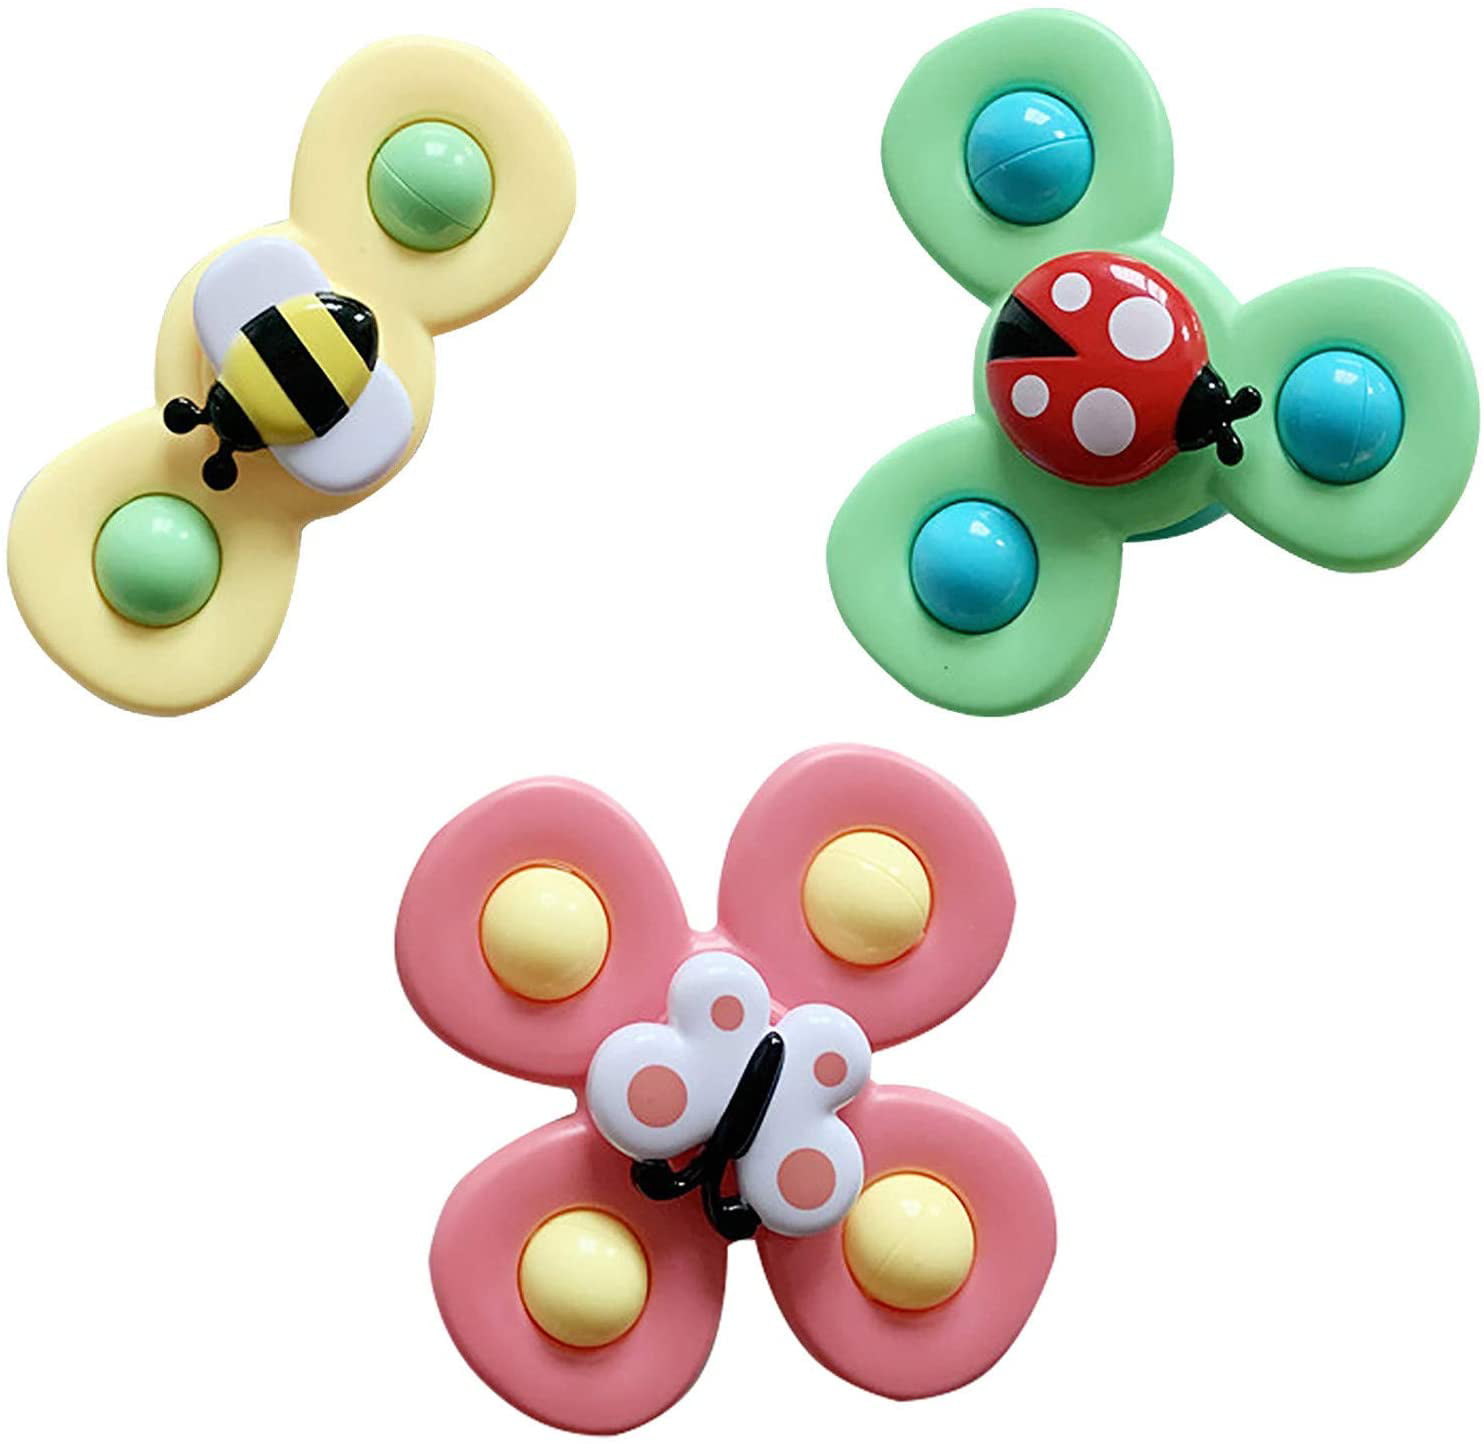 Spin Sucker Top Spinner Toy Safe Interesting Gameplay for Kids Dheera 3pcs Suction Cup Top Toy Suction Cup Baby Toys Baby Bath Toys 